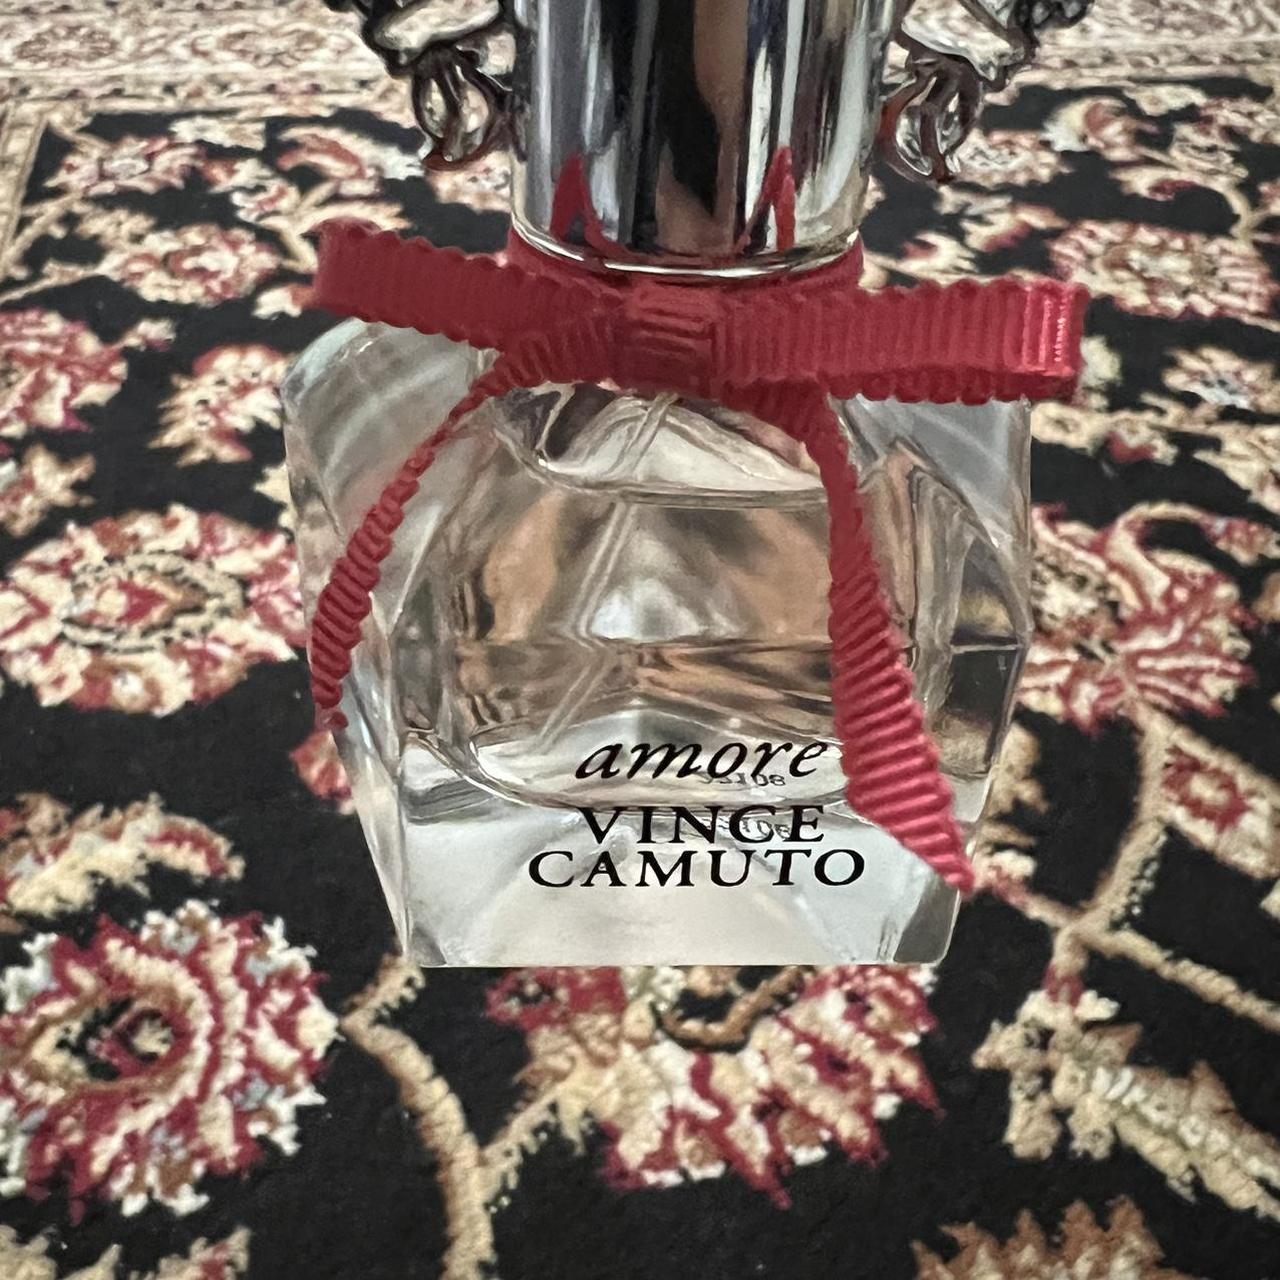 ▪️Vince Camuto Amore Perfume ▪️Full 1 ounce bottle, - Depop